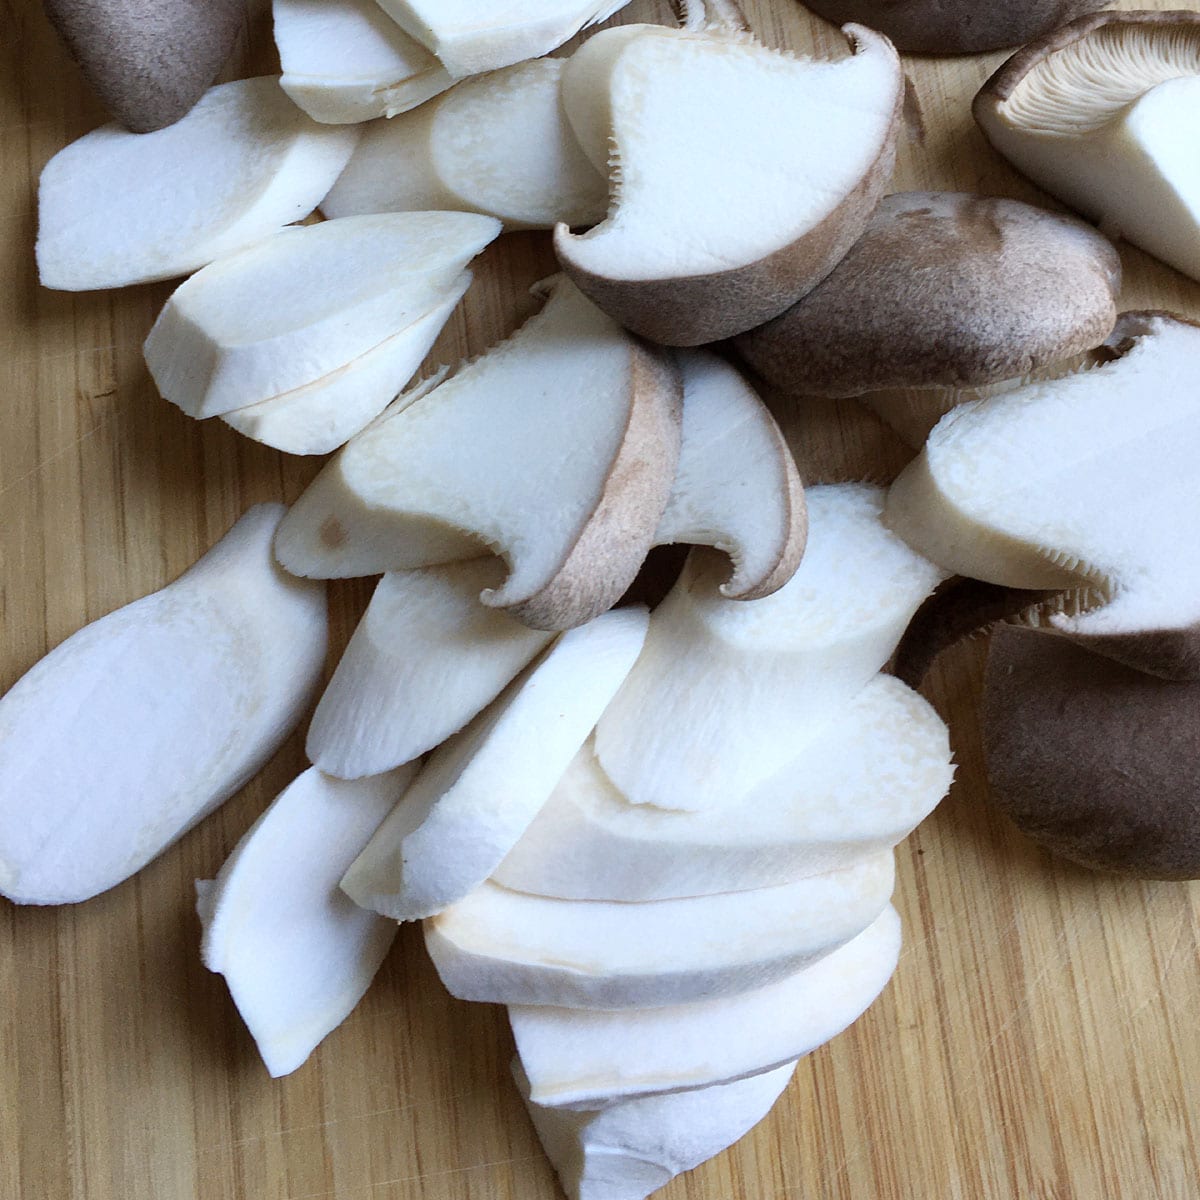 Thick slices of white and brown mushrooms on a wooden cutting board.